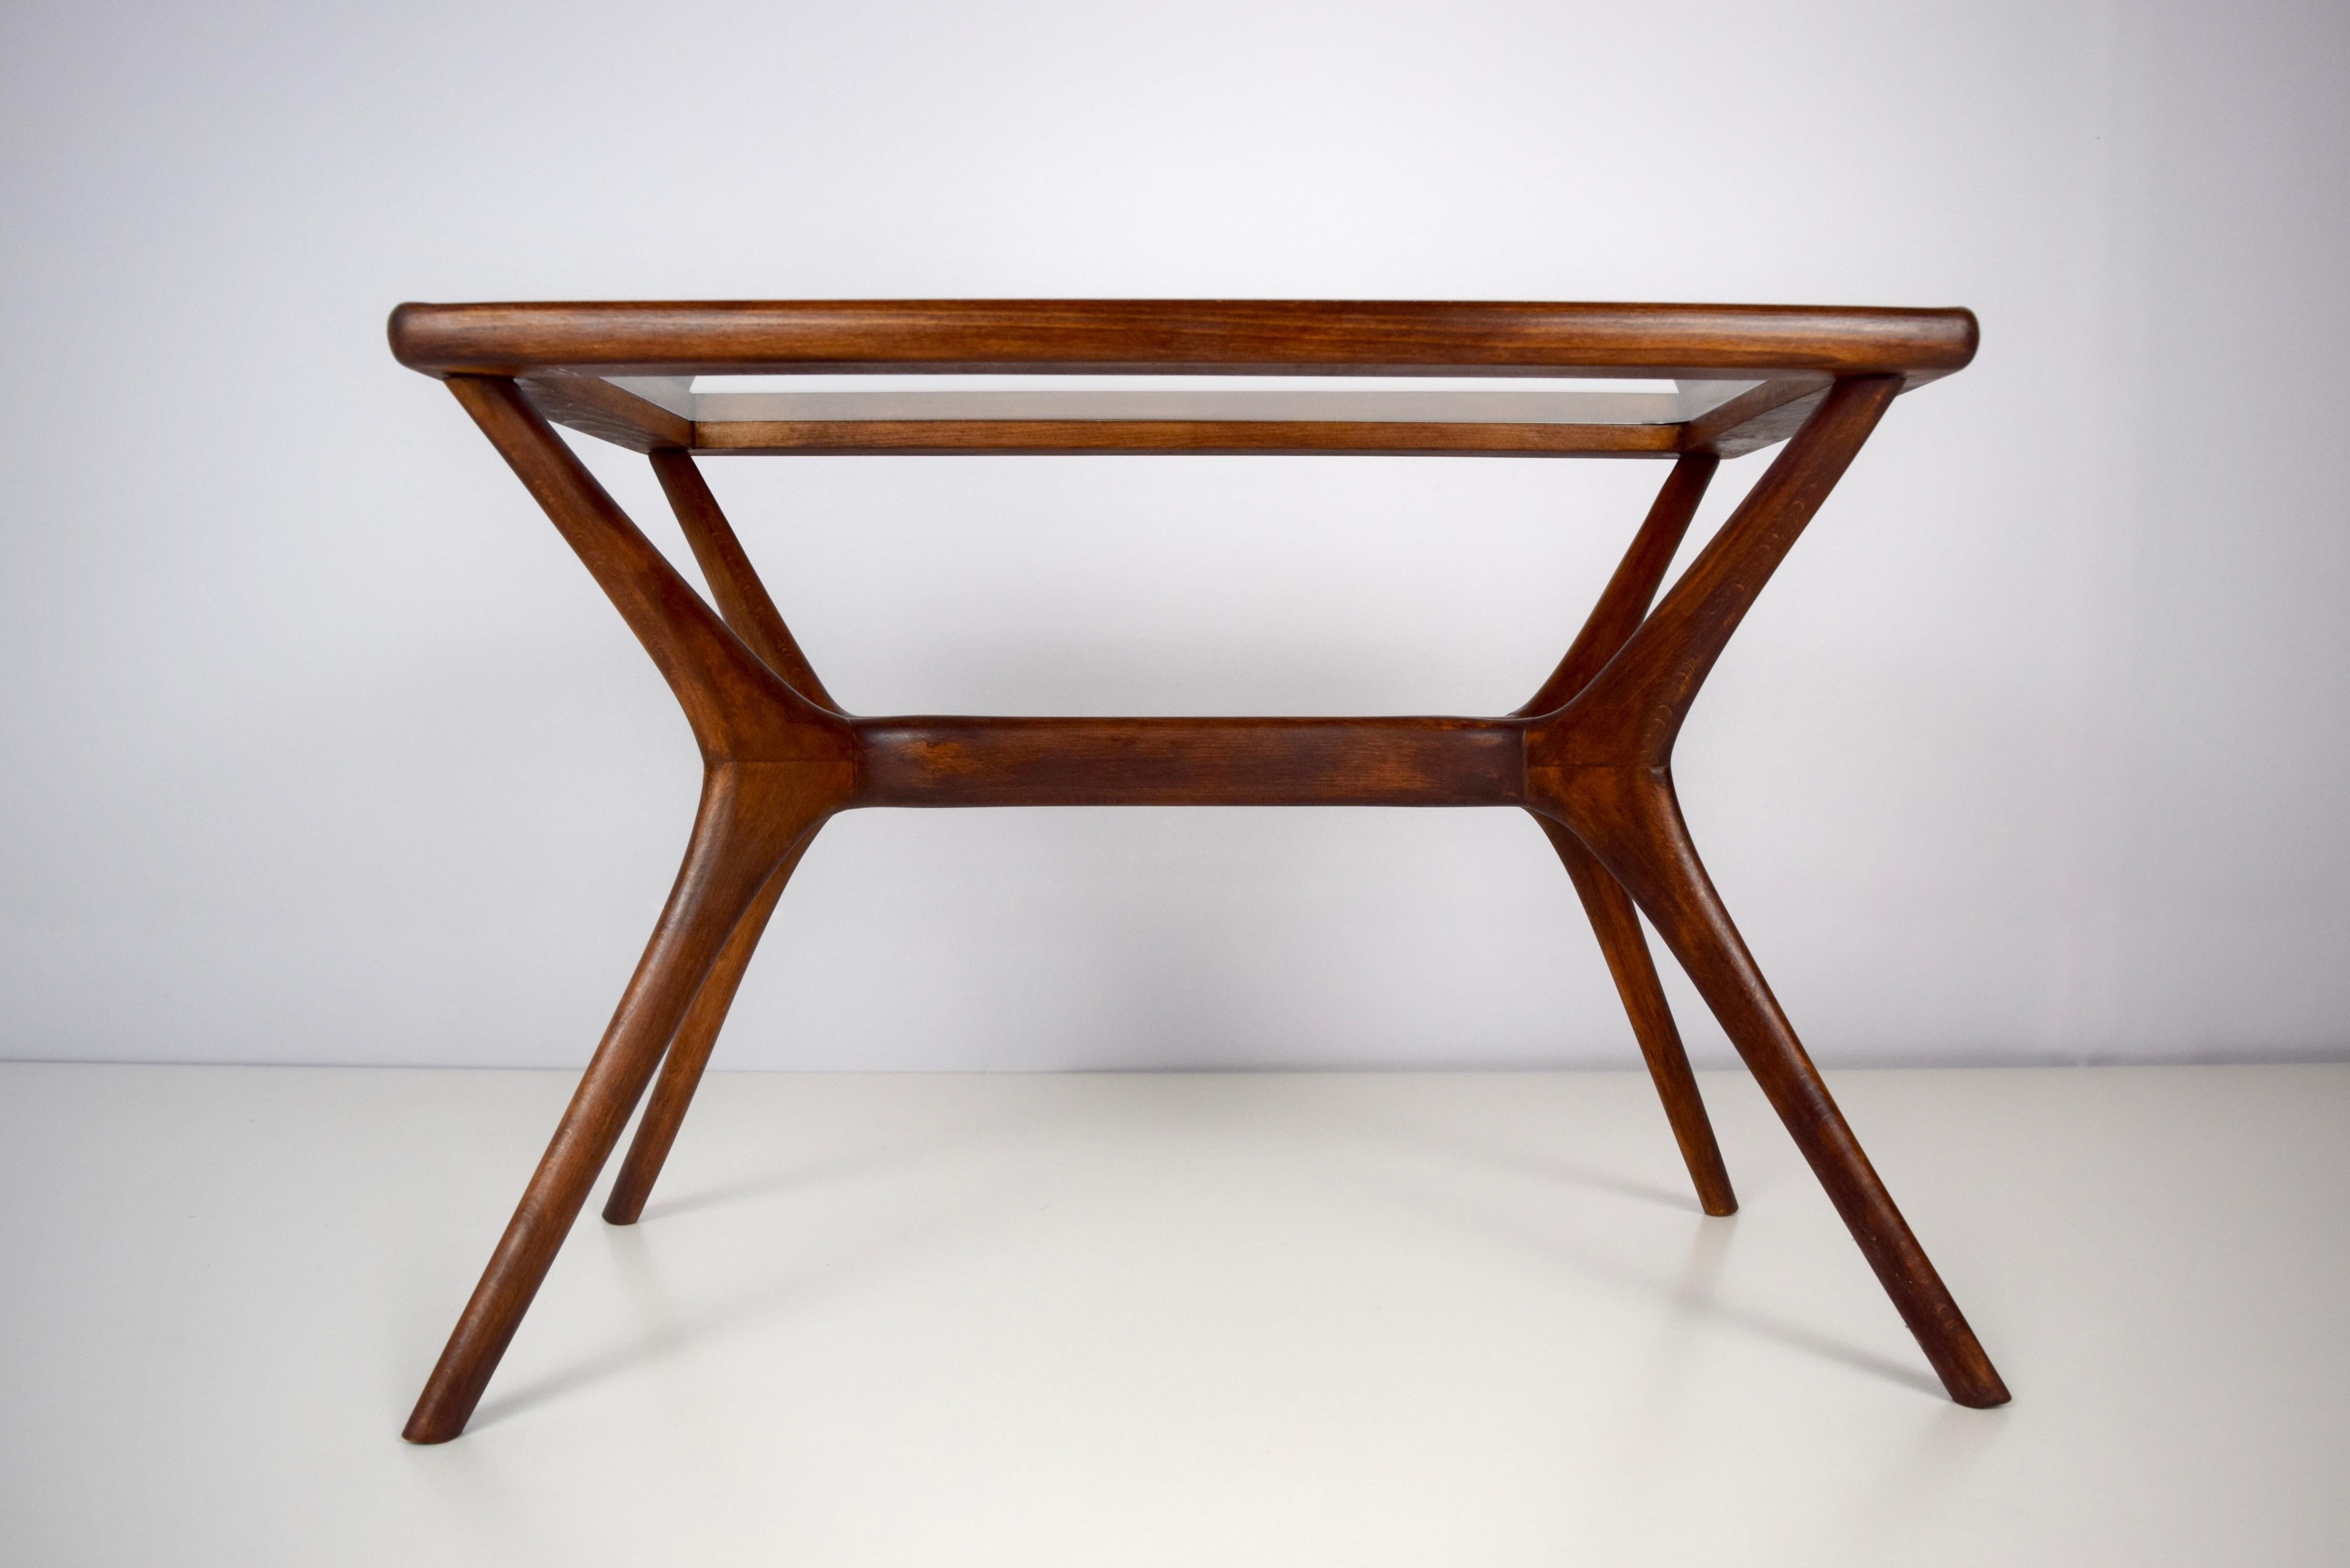 Italian Mid-Century Modern Coffee Table in Wood and Glass, Italy, 1950s